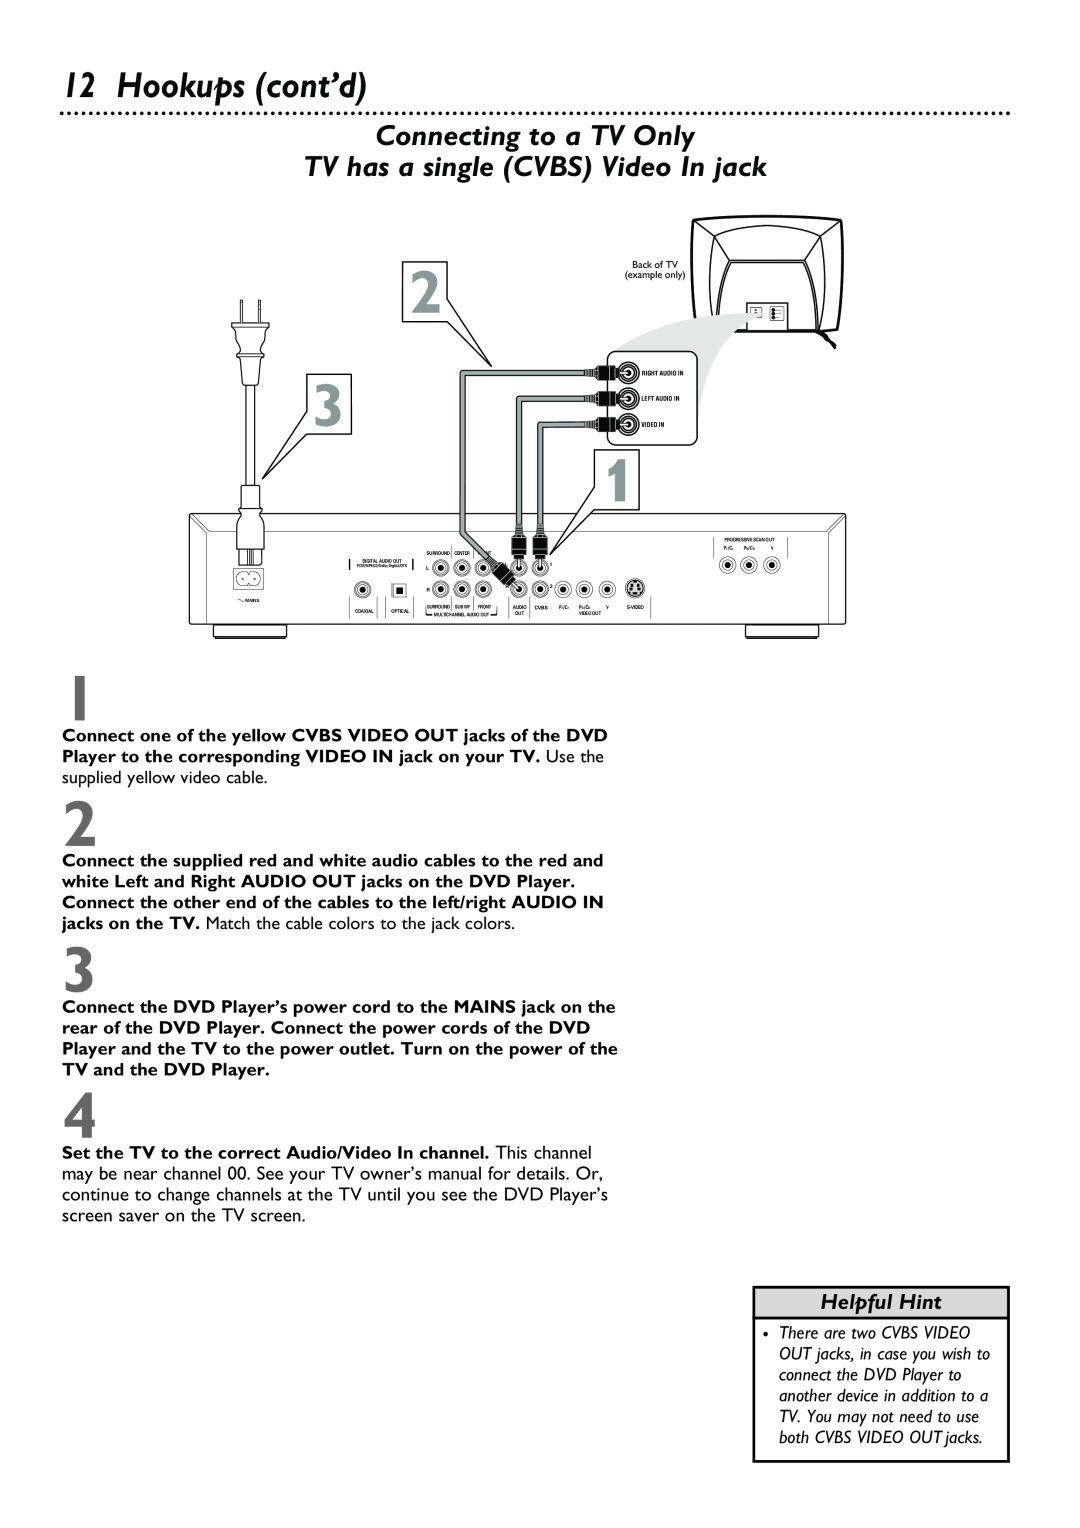 Philips DVD962SA owner manual Hookups cont’d, Connecting to a TV Only TV has a single CVBS Video In jack, Helpful Hint 